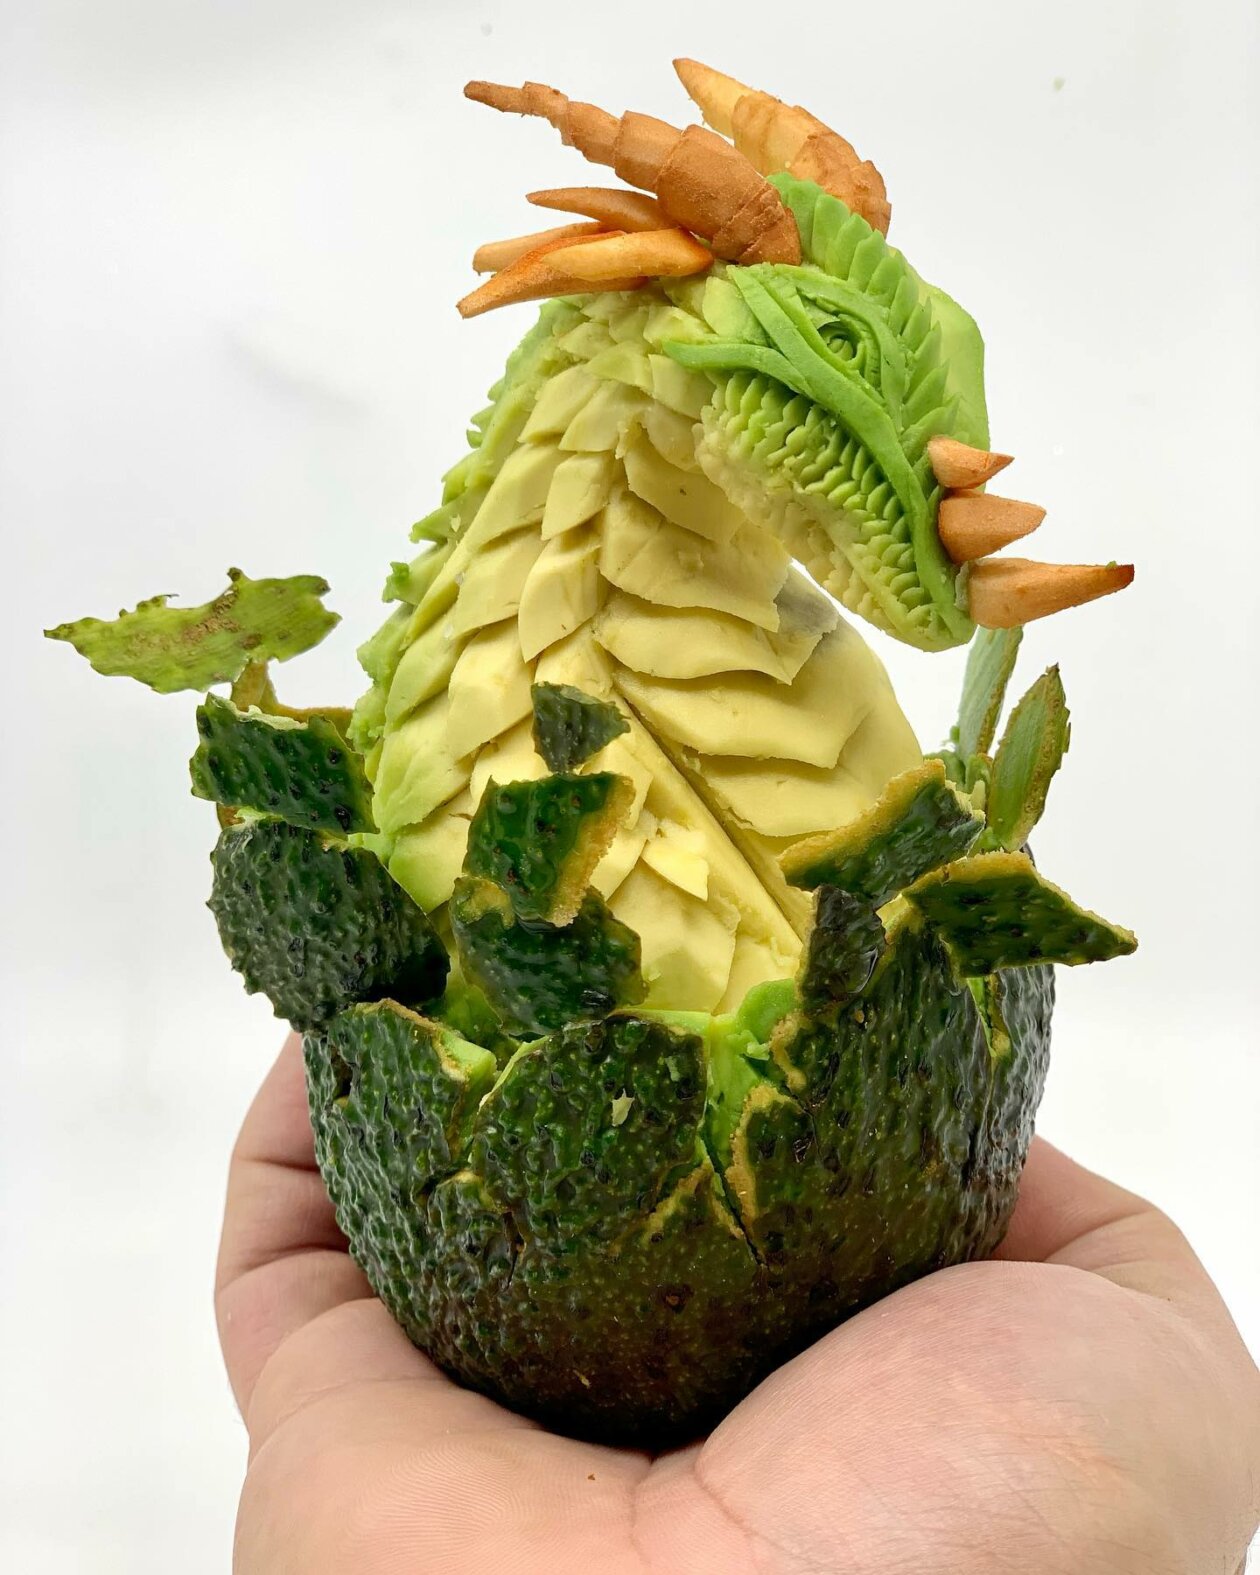 Superb Fruit And Vegetable Carvings By Daniele Barresi 16